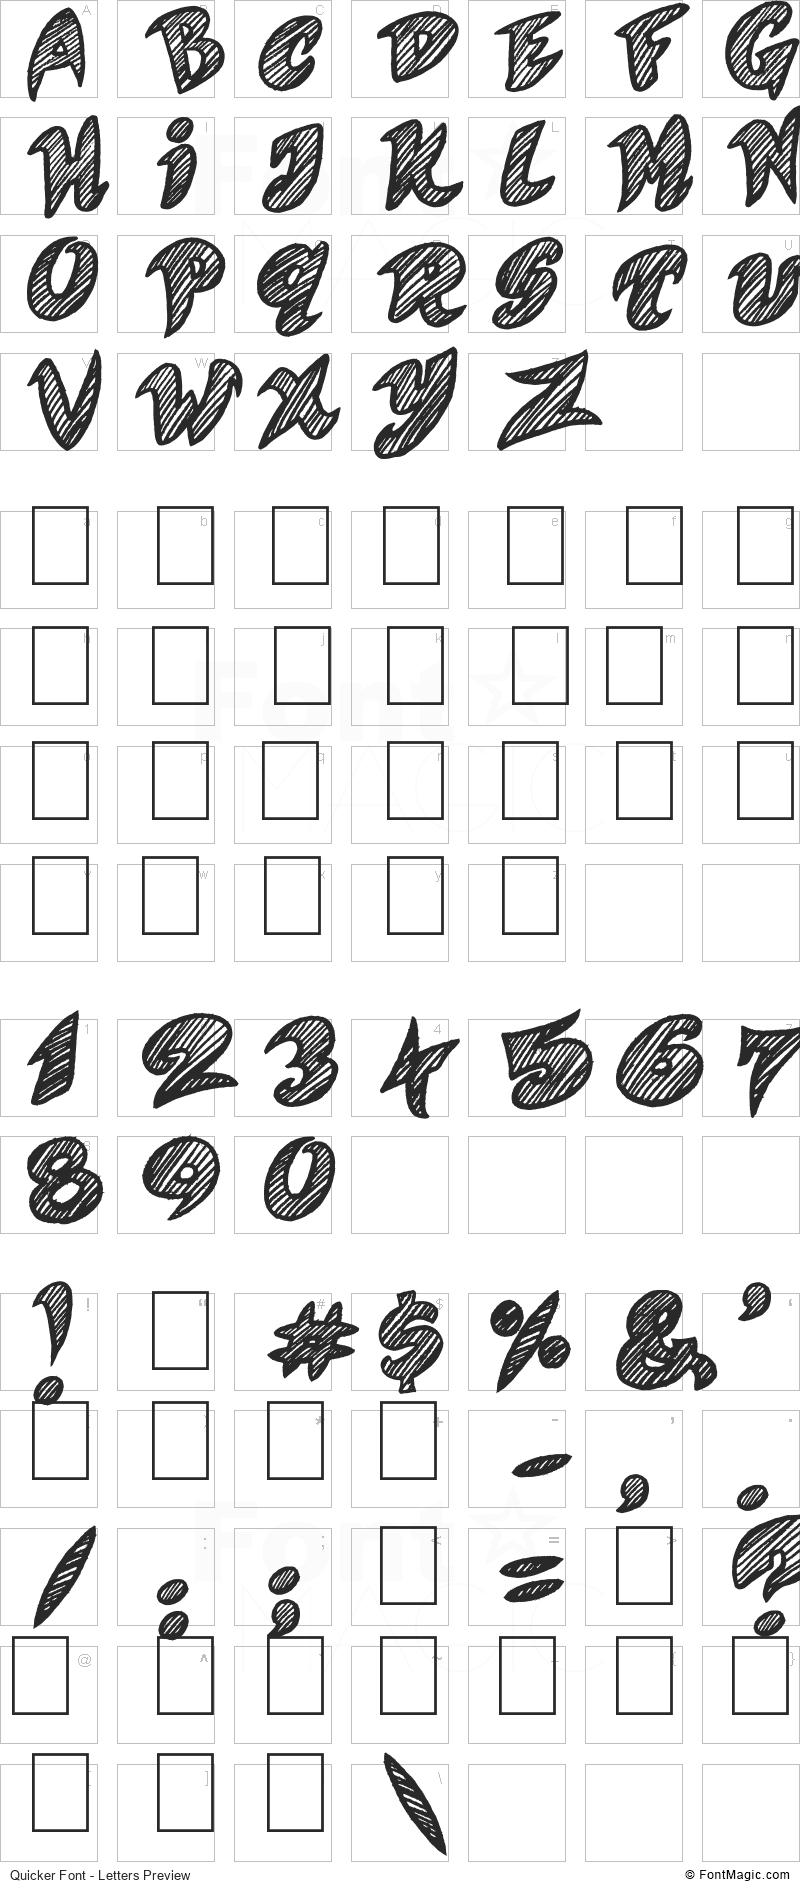 Quicker Font - All Latters Preview Chart